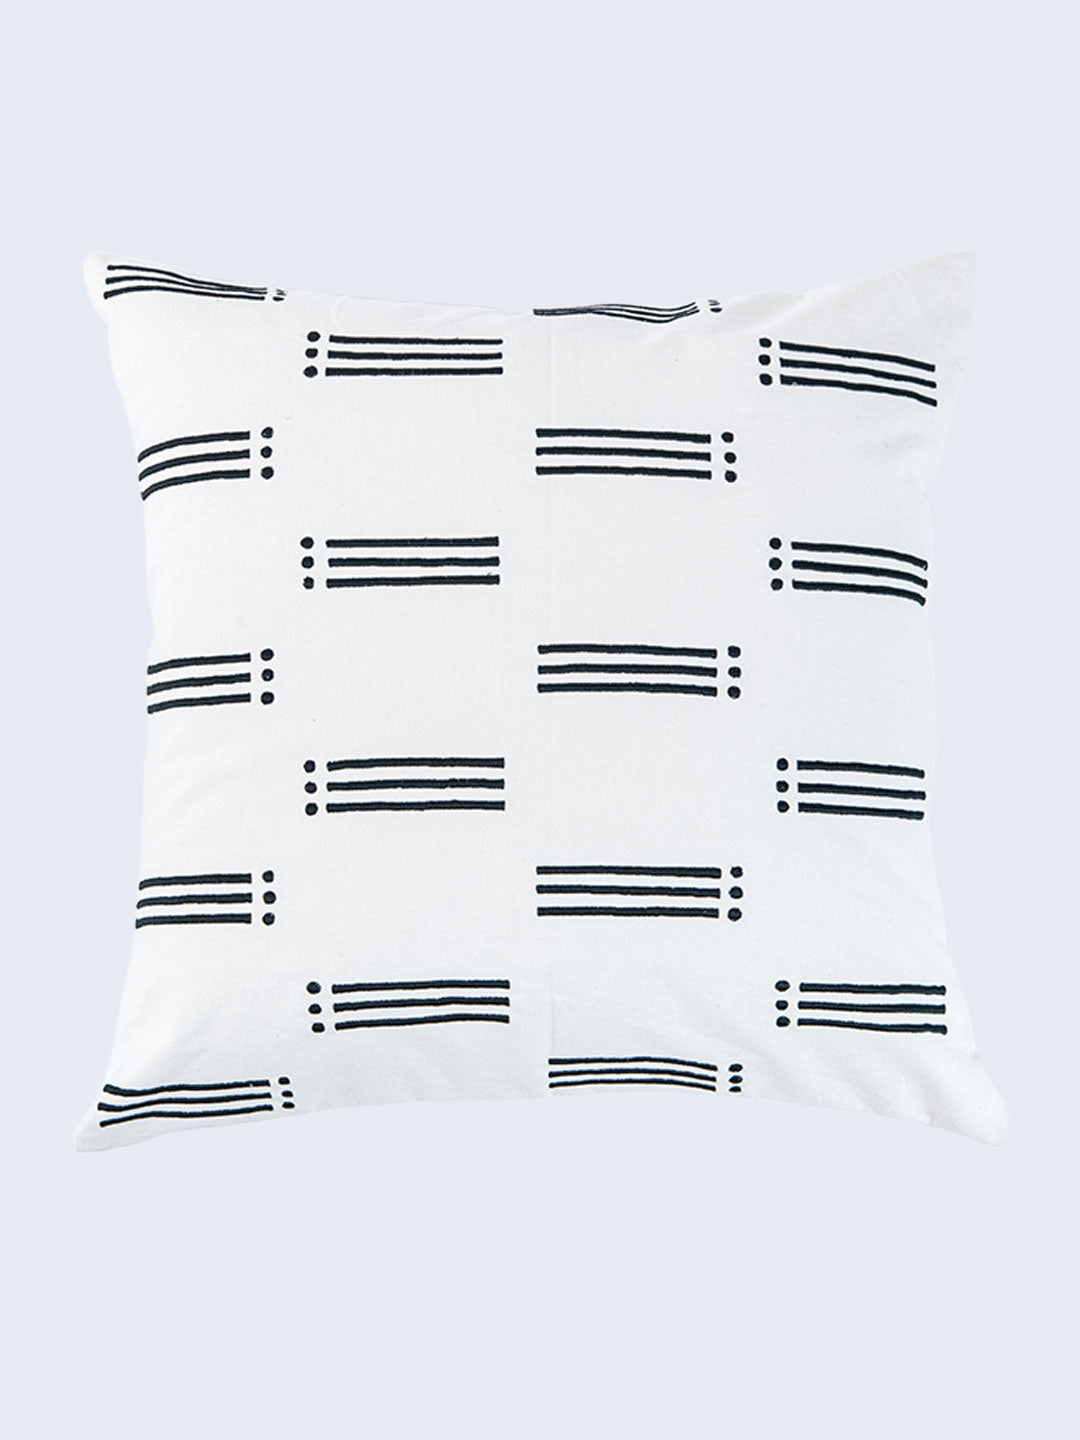 pillow covers